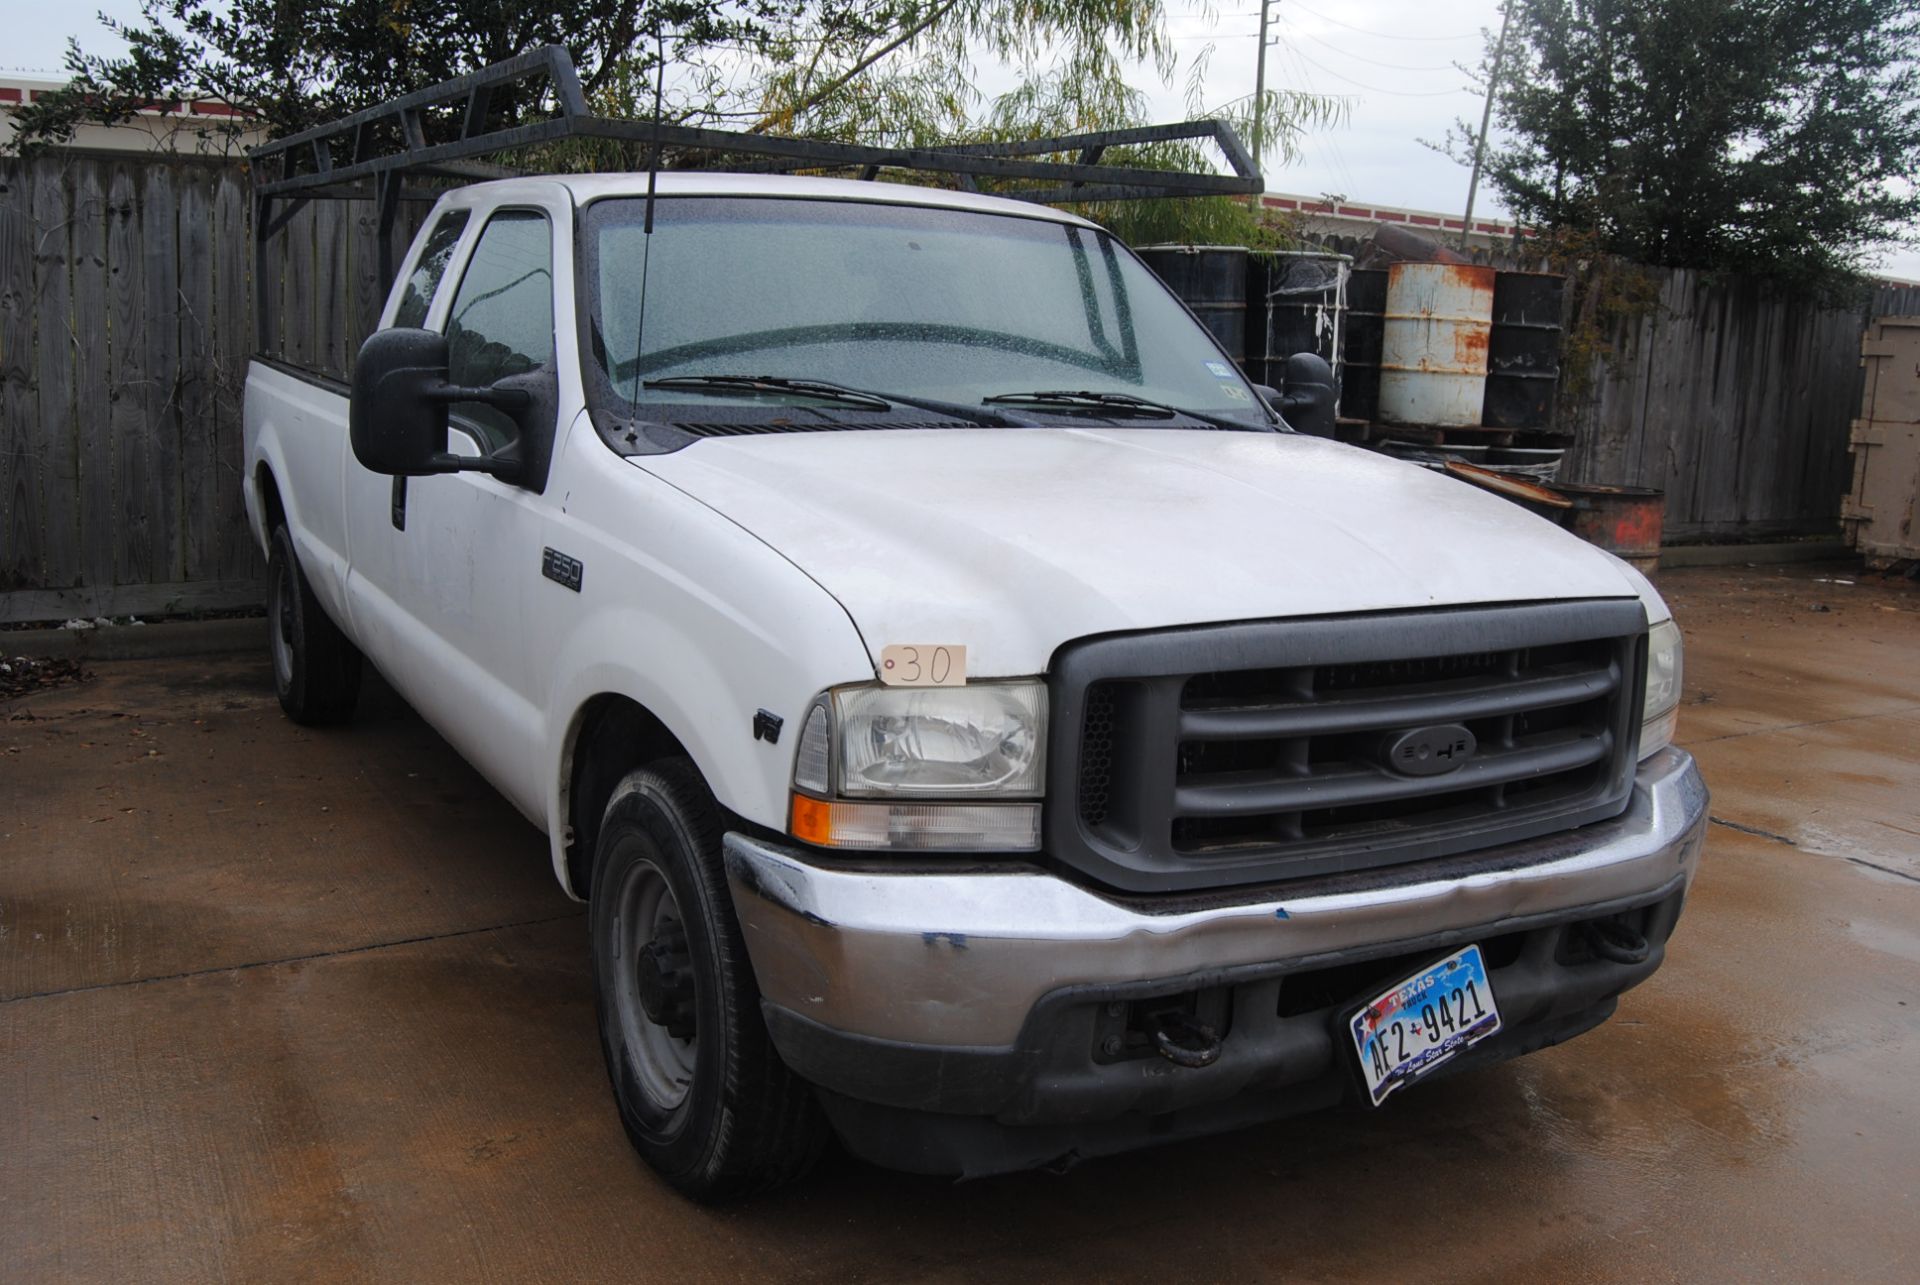 '04 Ford Work Truck F250 Super Duty - Image 3 of 11